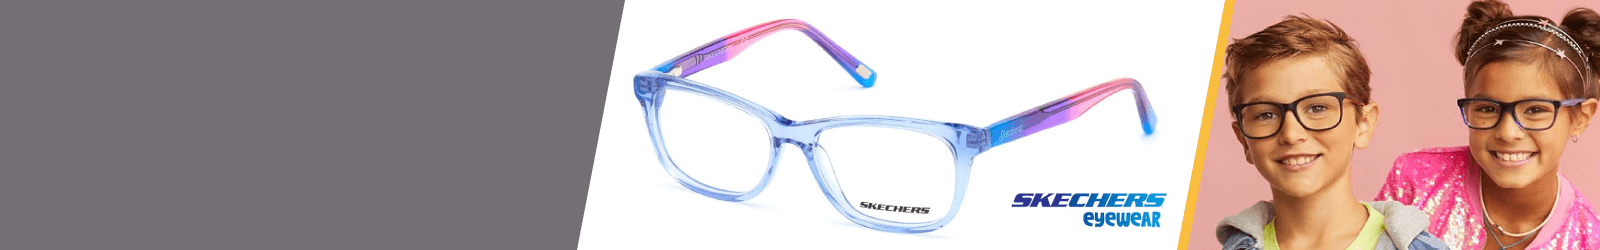 Skechers  Eyewear for Kids from 4 to 6-year-old